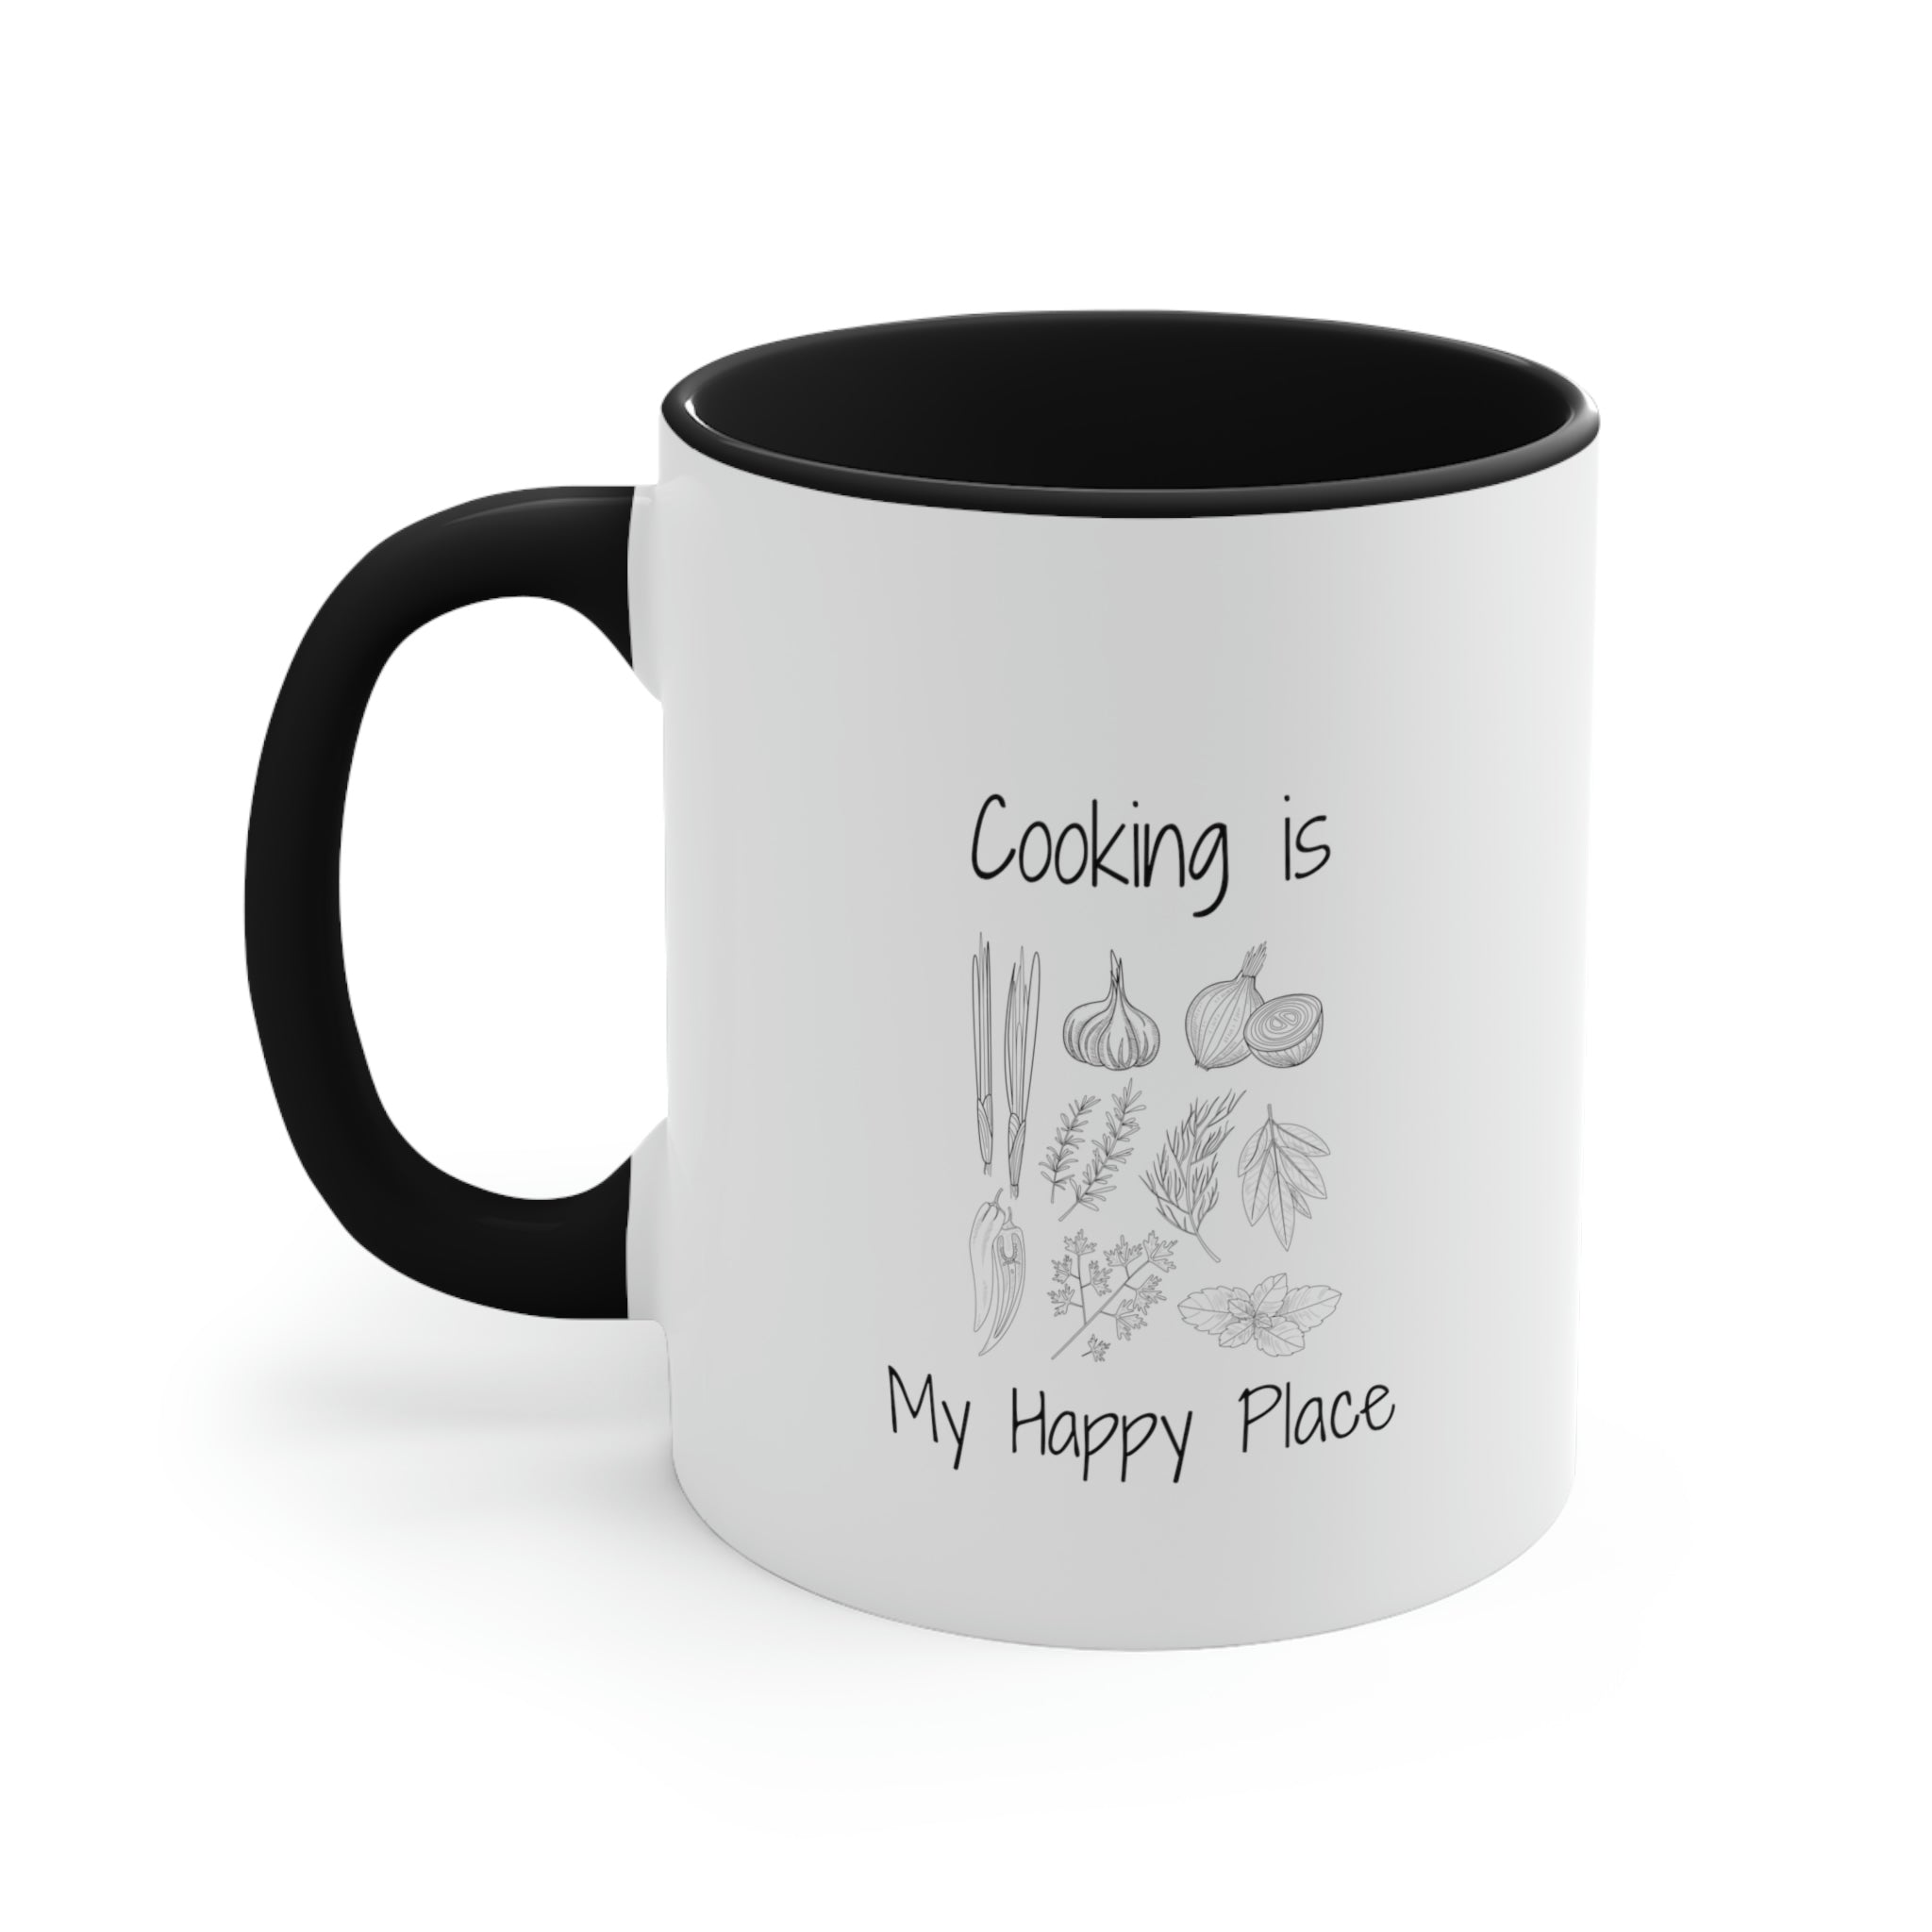 Coffee Mug, Cooking is My Happy Place 11oz Ceramic Mug with Light-Hearted Design, Dishwasher and Microwave Safe, Perfect Gift for Hot Beverage Lovers - cooking mug 2